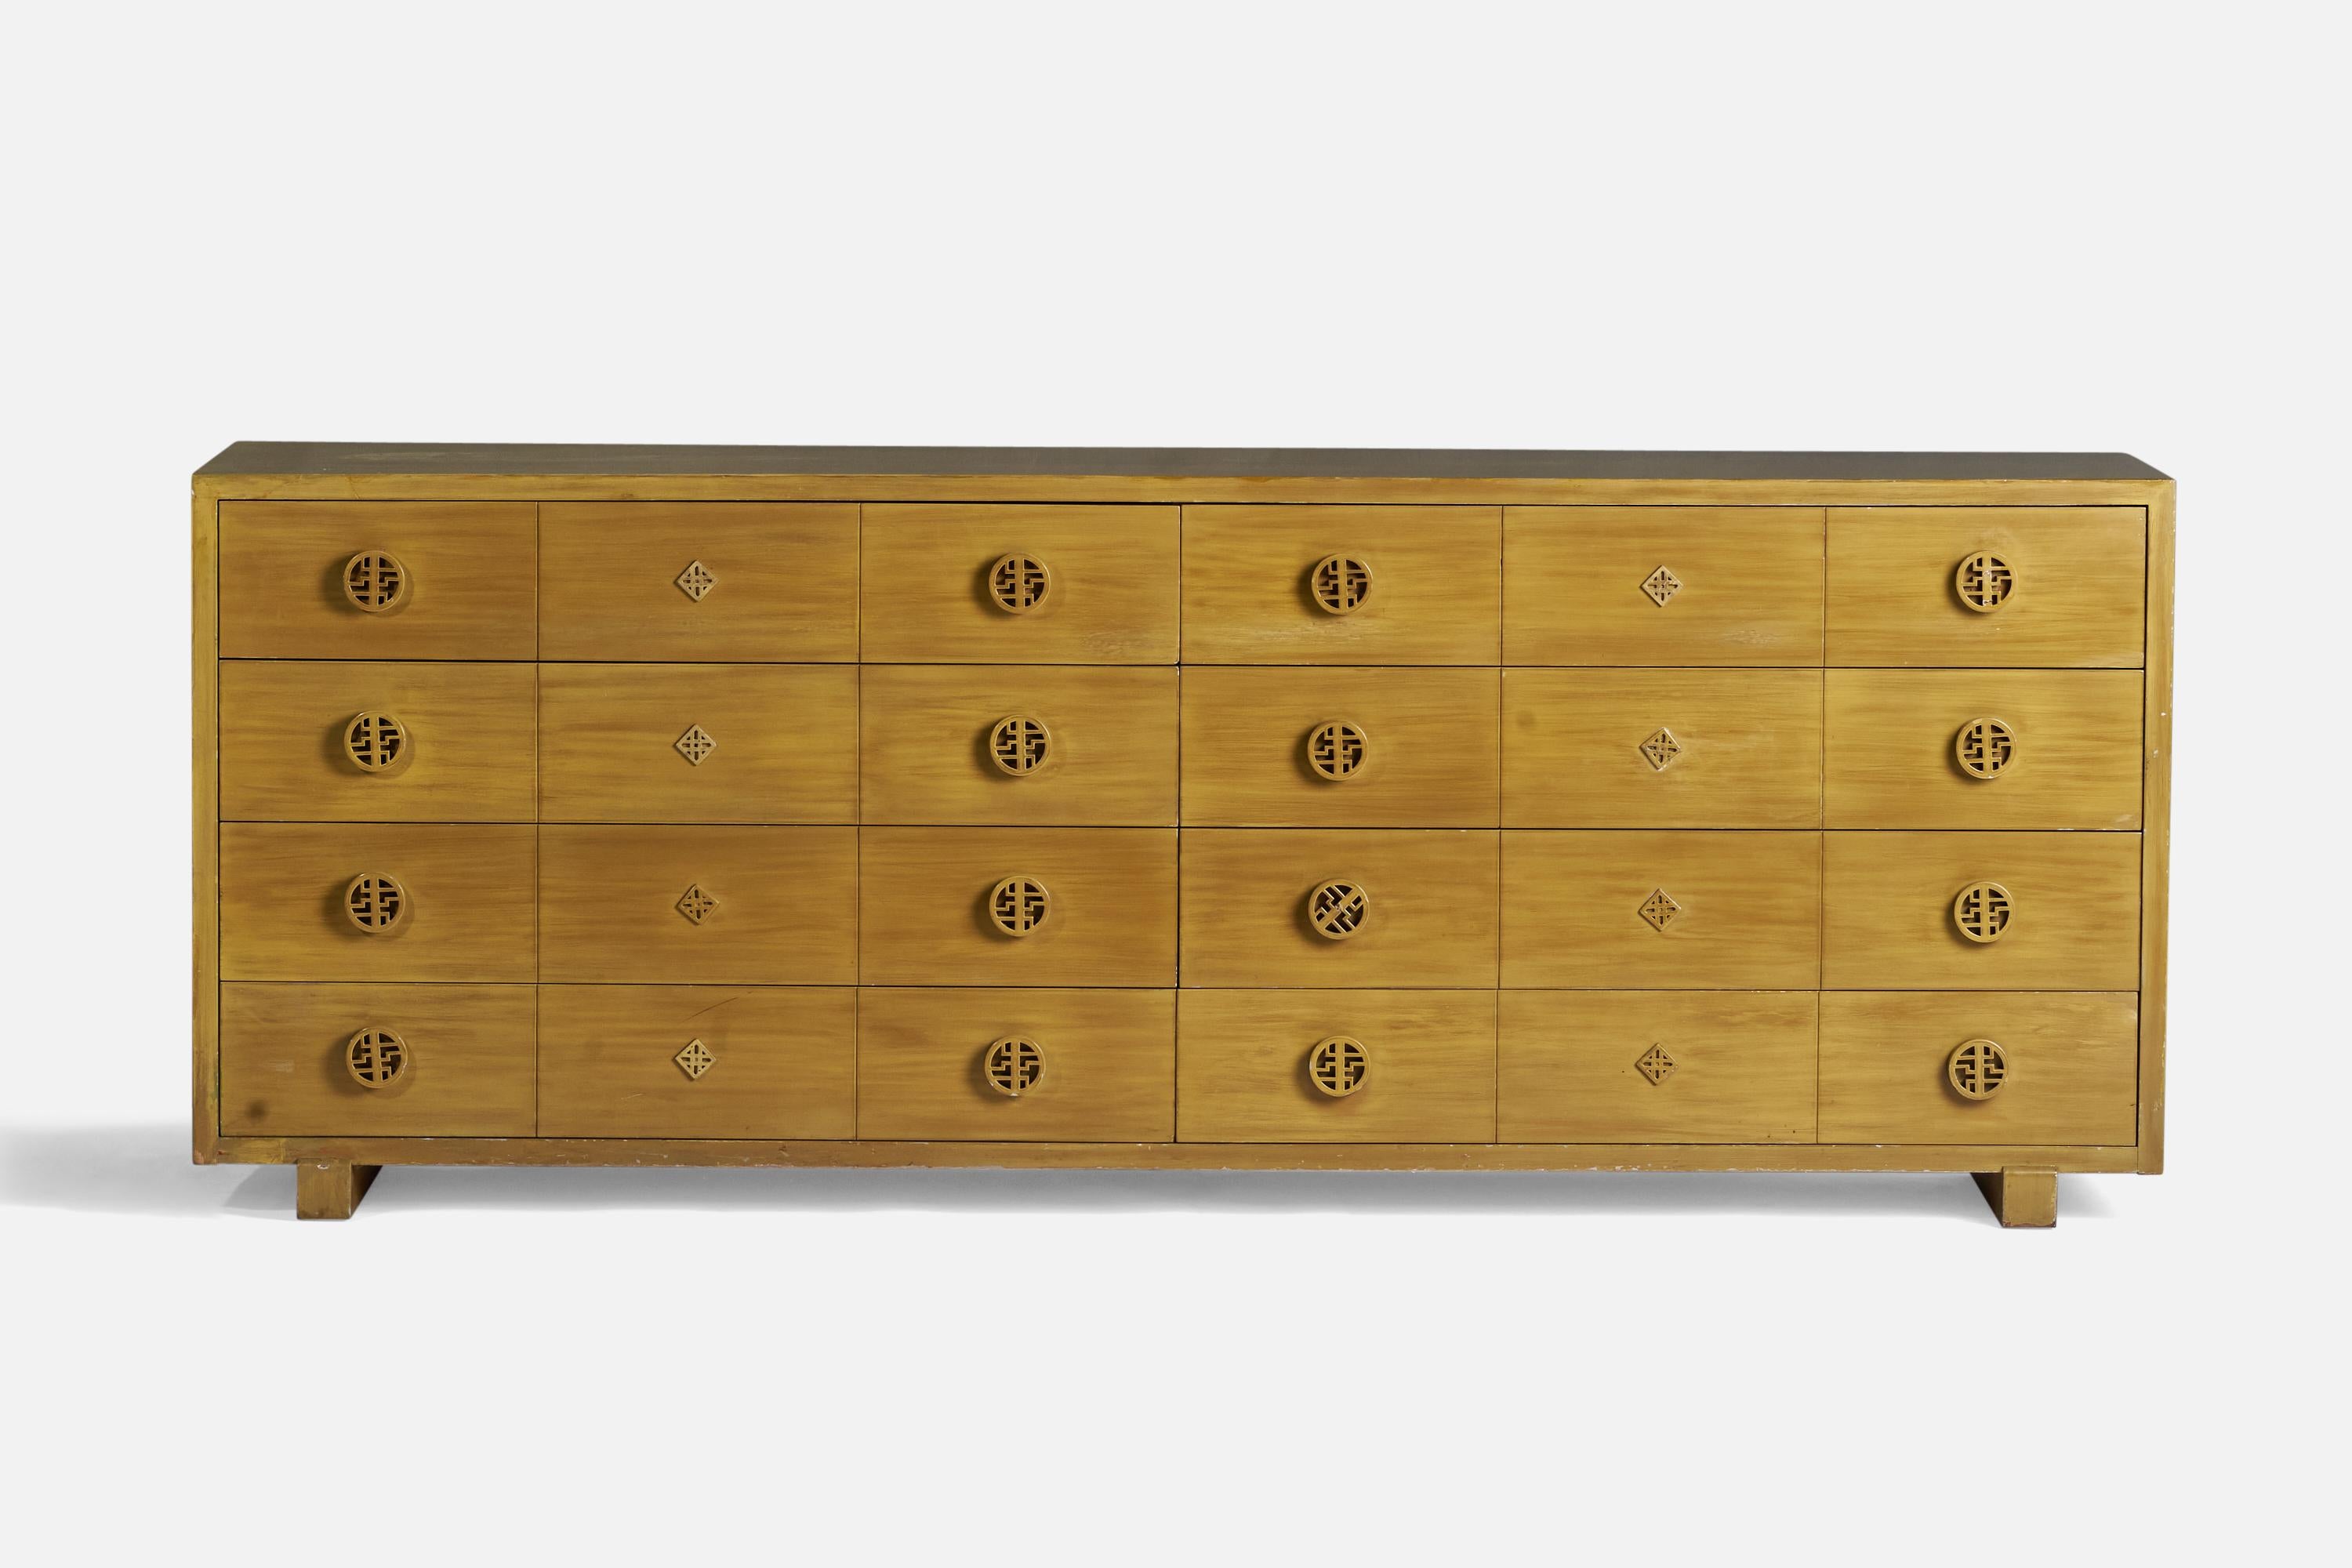 A wood dresser designed and produced by James Mont, USA, c. 1940s.

Originally from a James Mont interior.